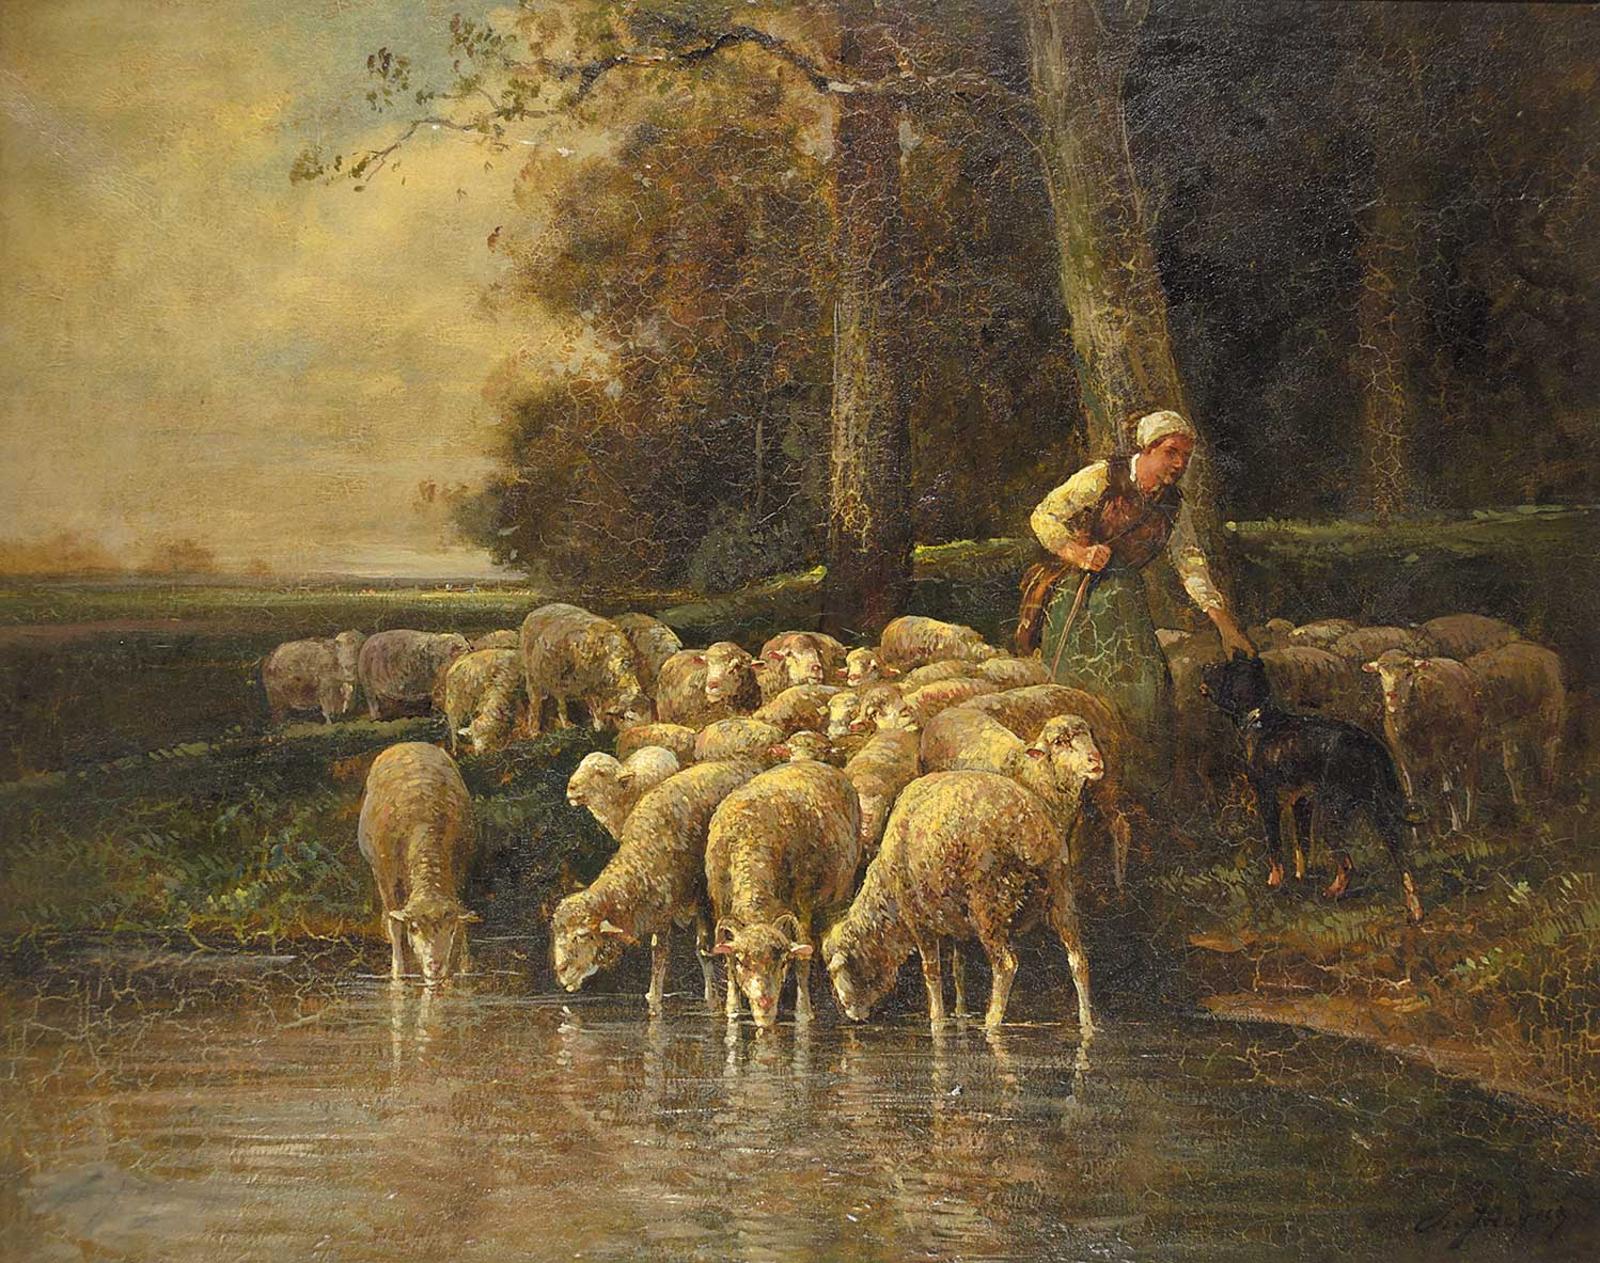 Charles Émile Jacque (1813-1894) - Untitled - Shepherd Watering the Flock